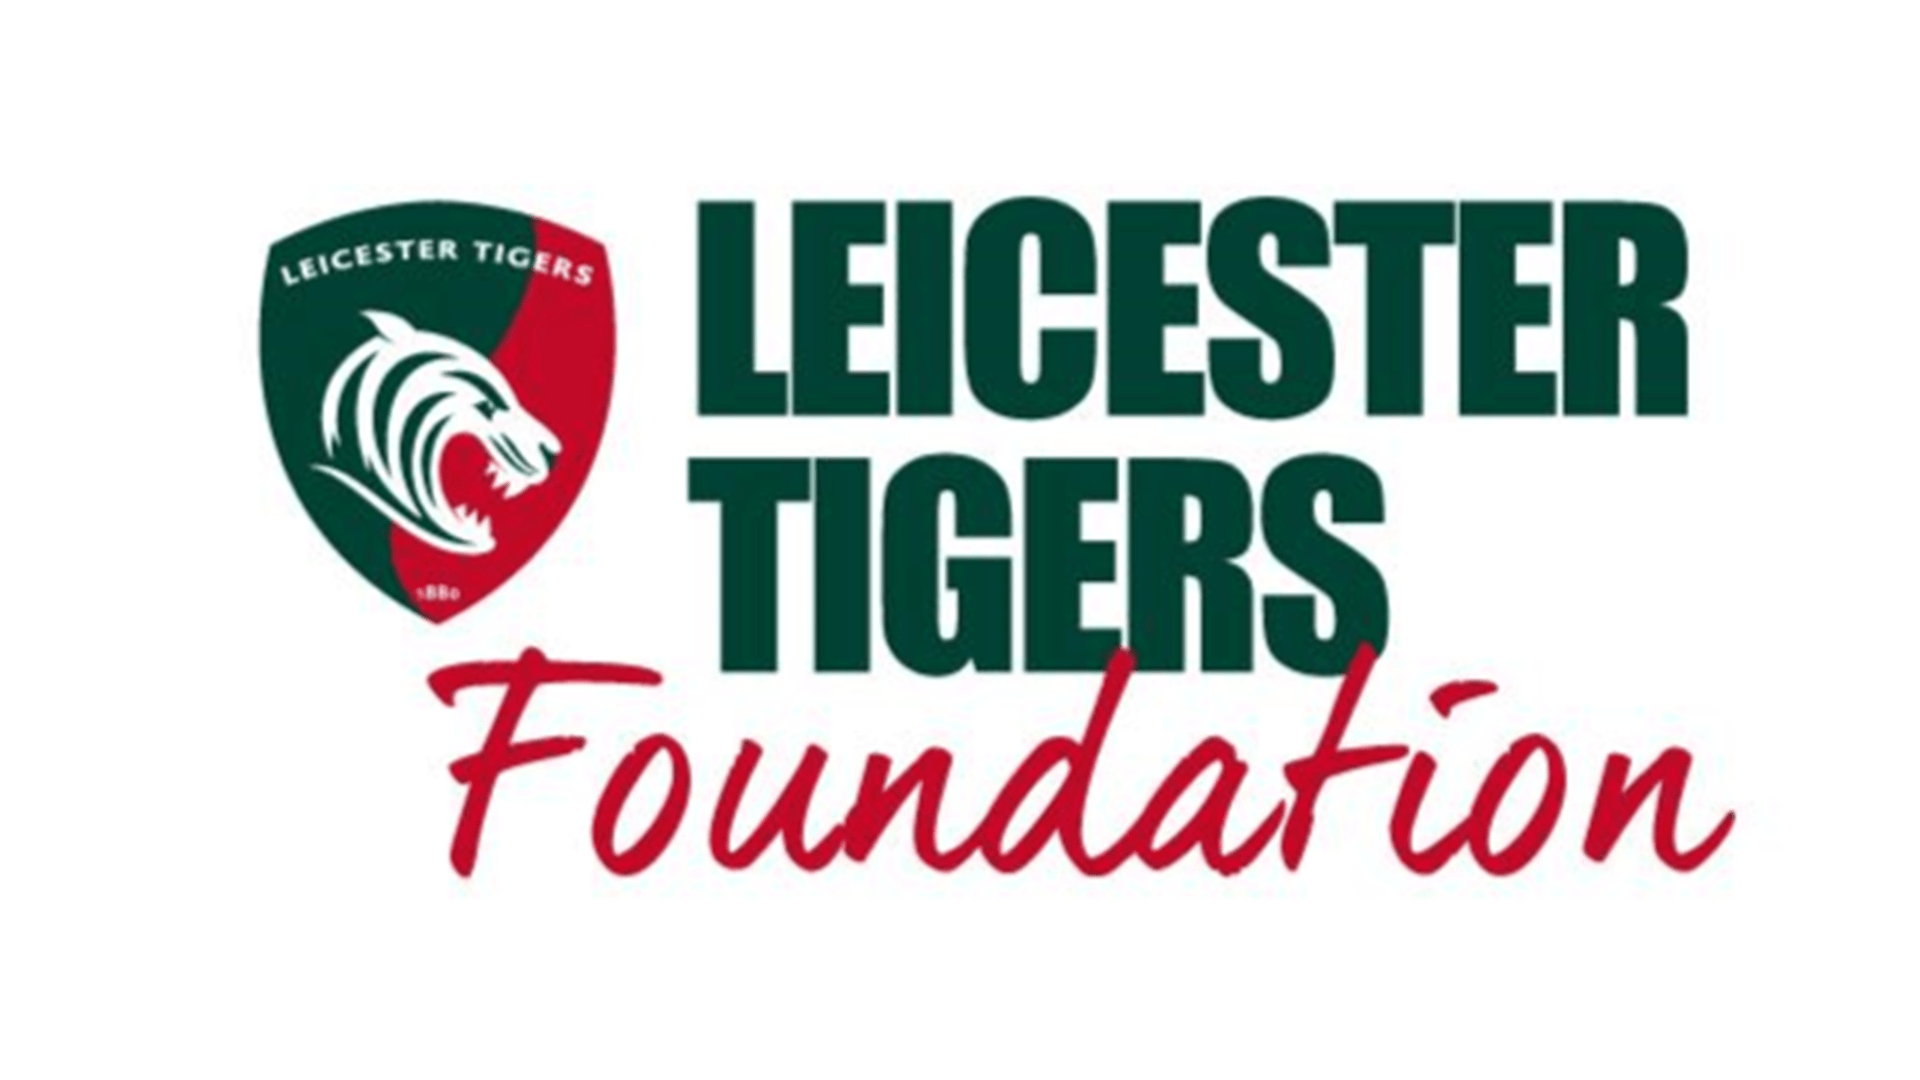 David Needham is fundraising for Leicester Tigers Foundation